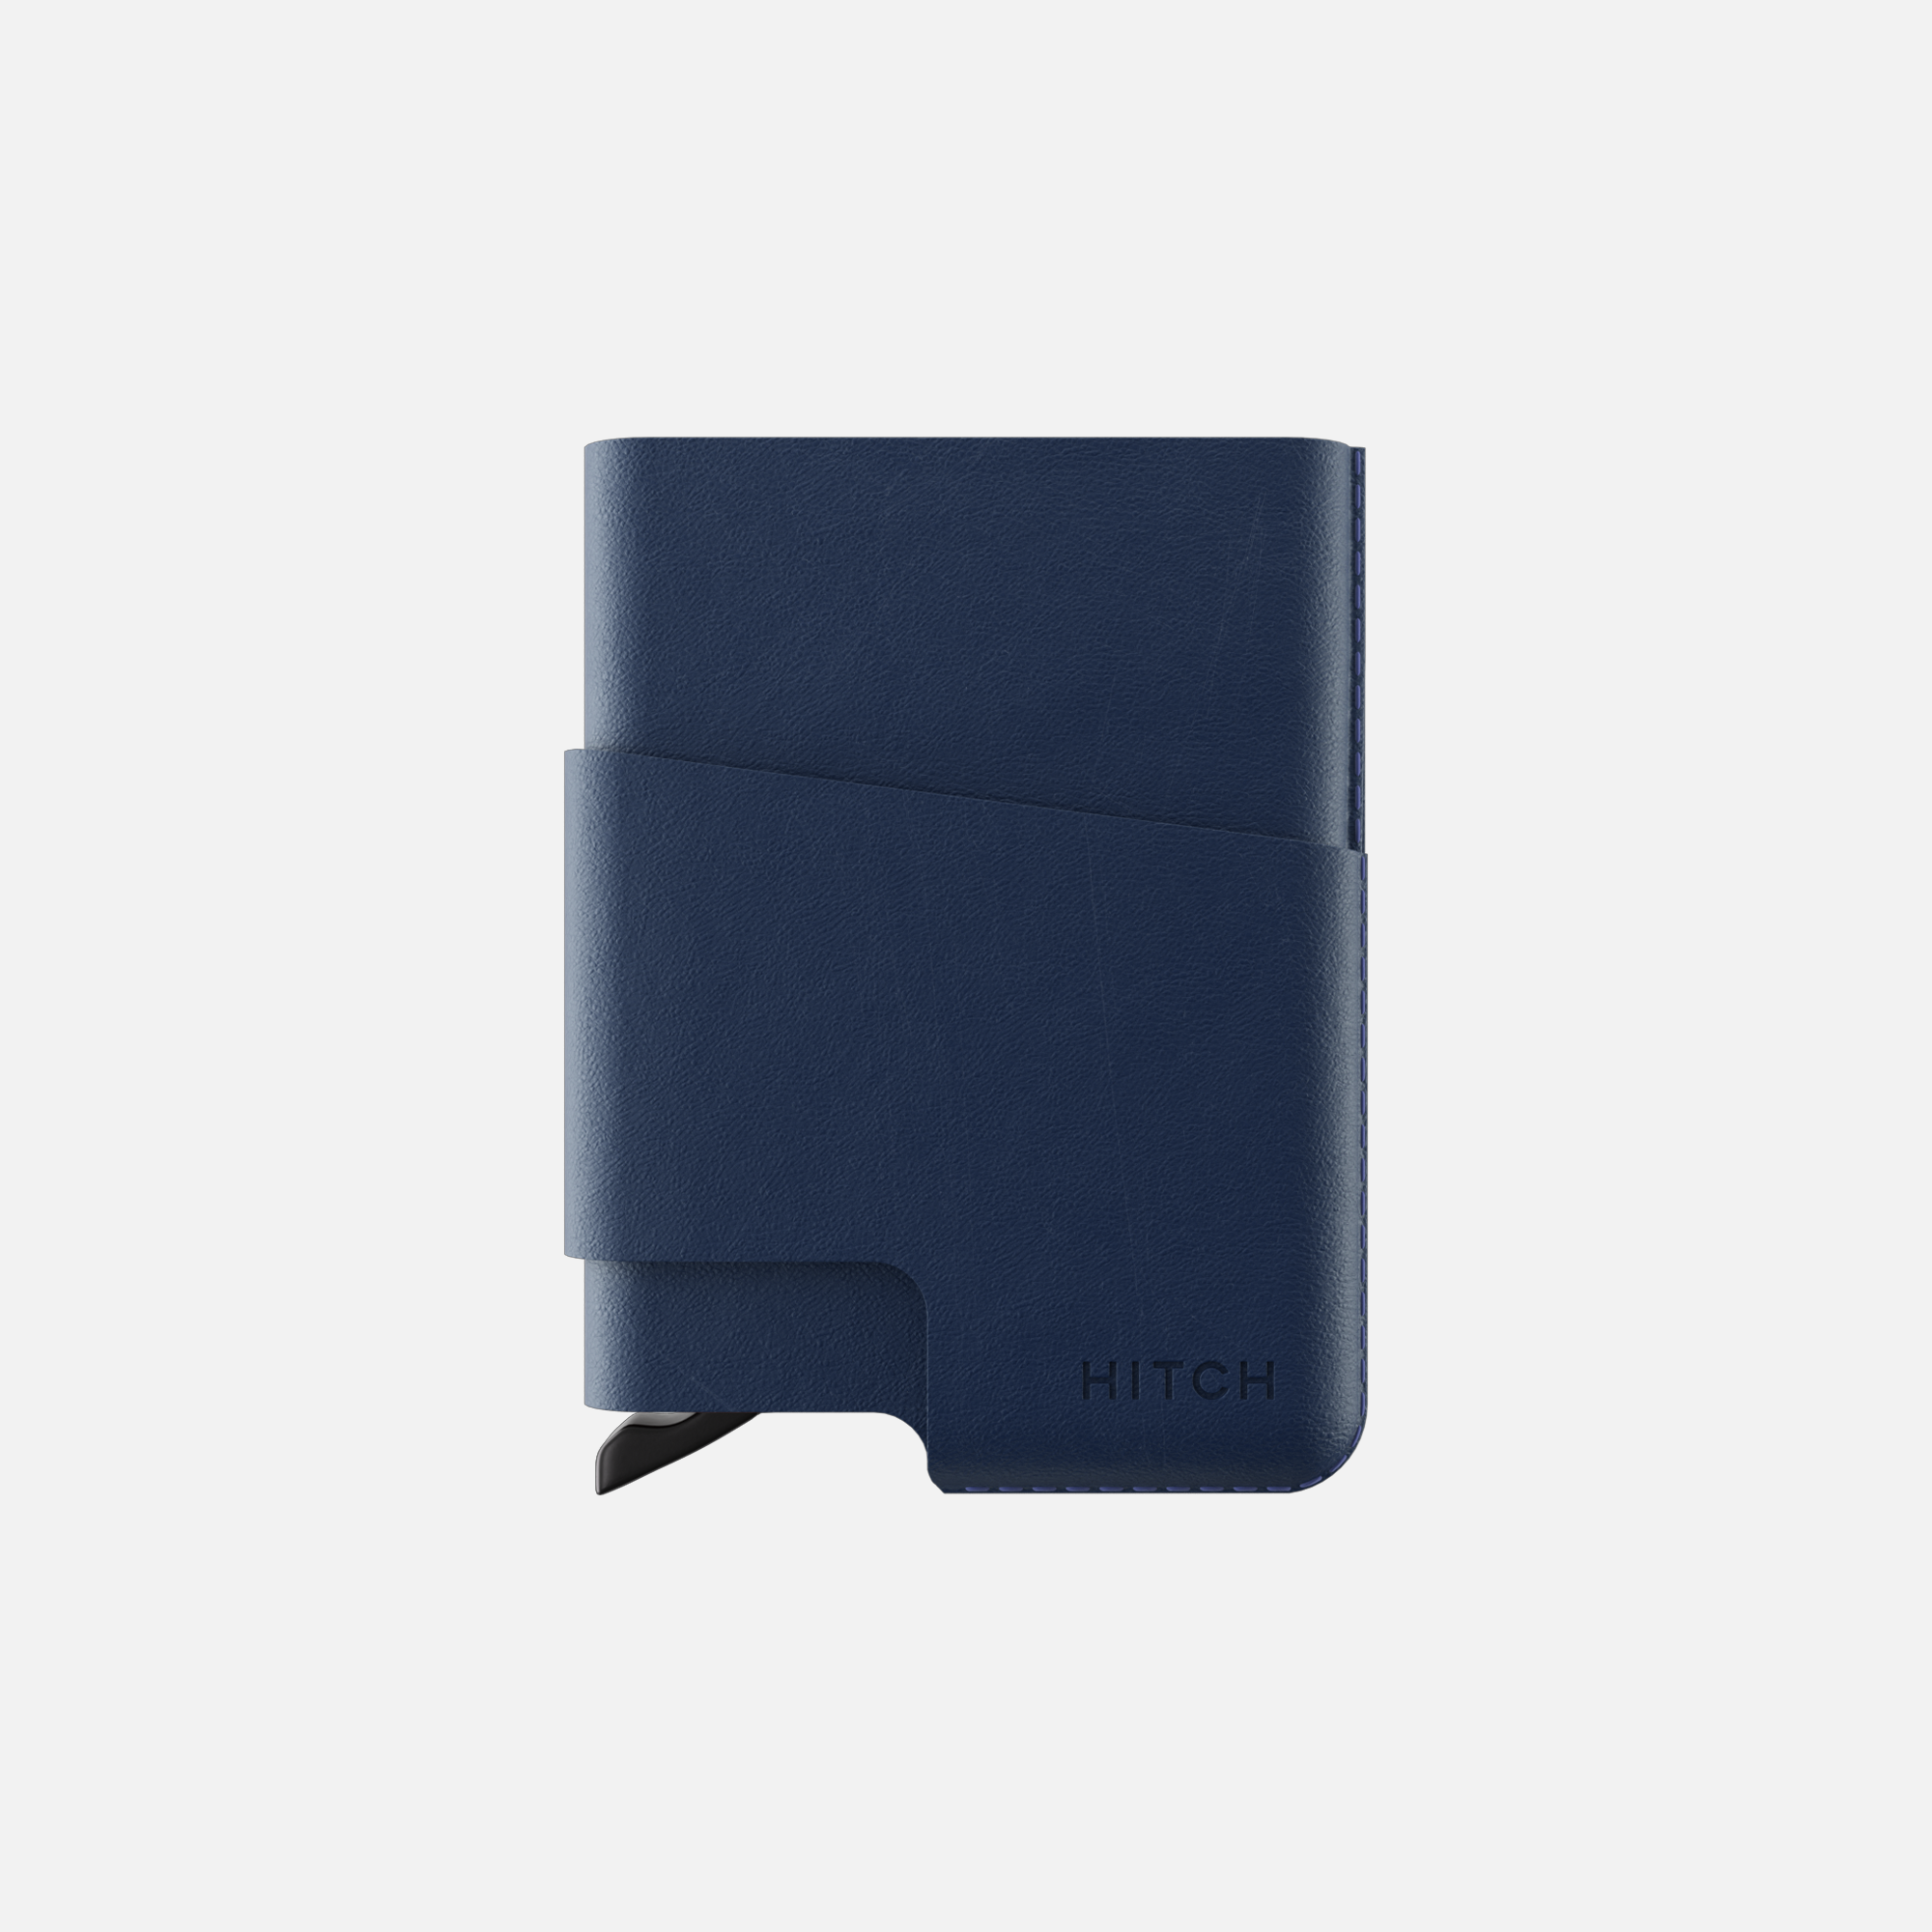 Navy blue leather cardholder wallet with elastic closure and branded HITCH" on cover.